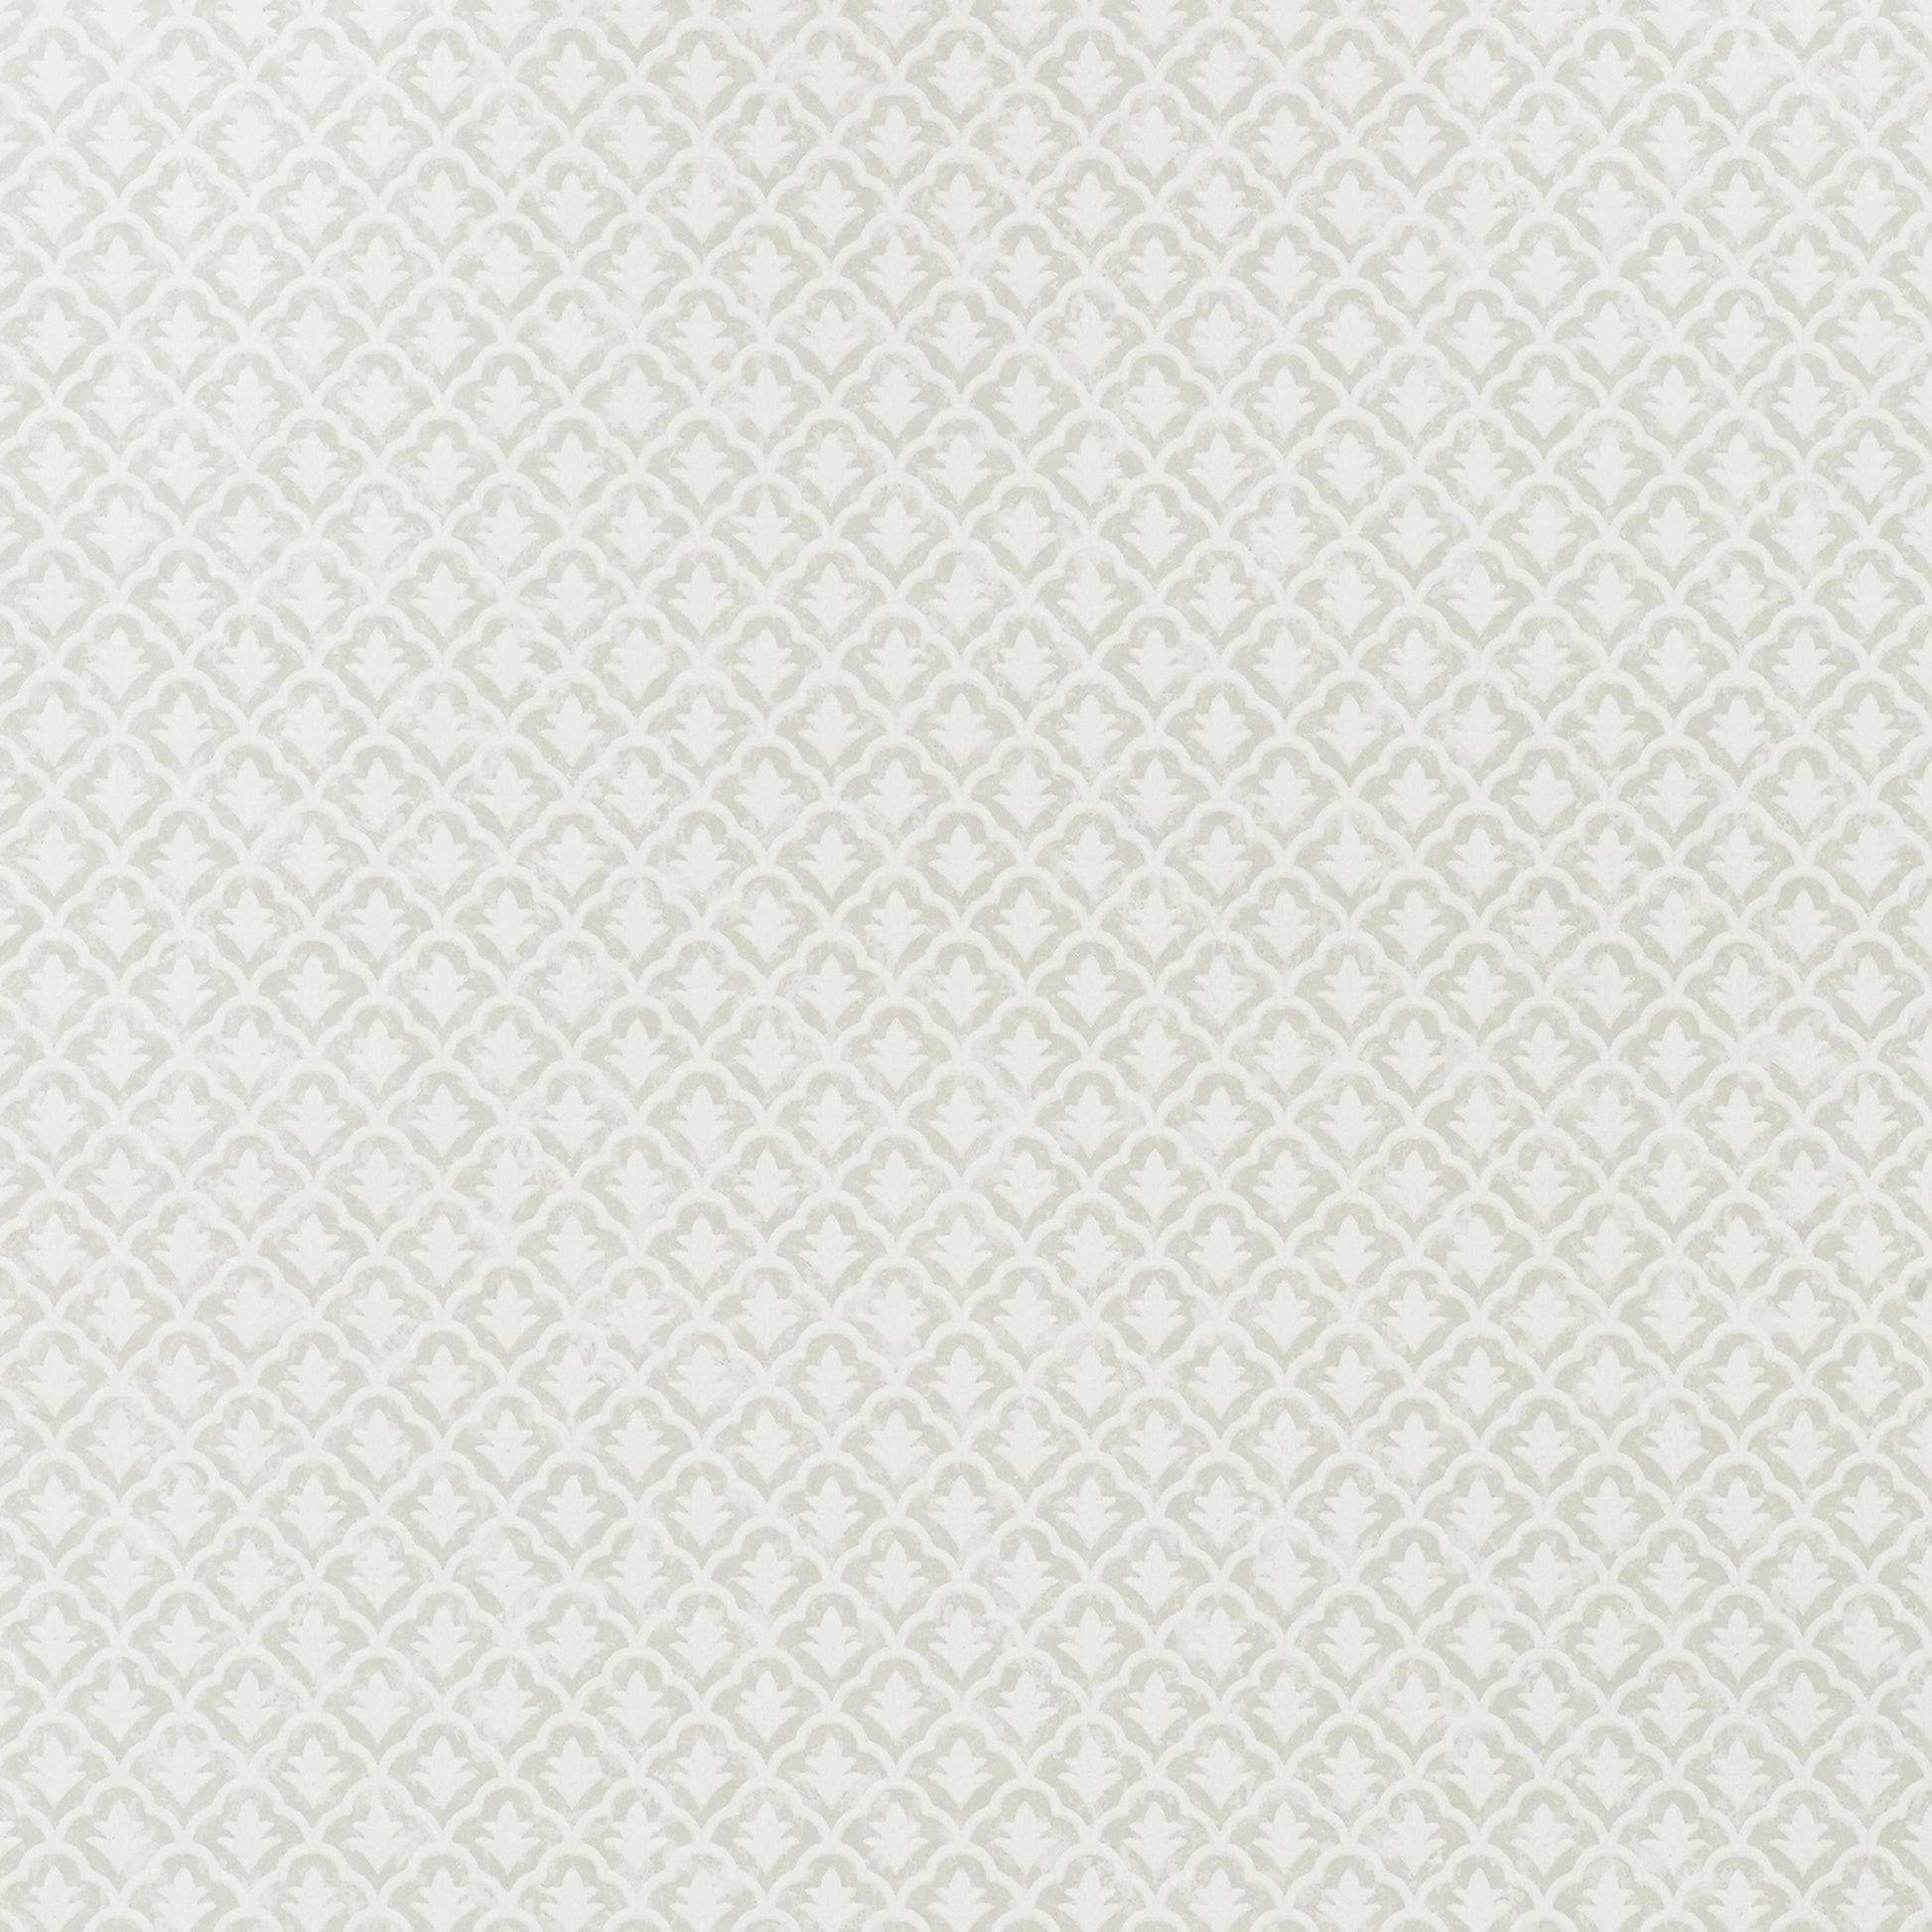 Purchase  Ann French Wallpaper Pattern number AT79137 pattern name  Fairfield